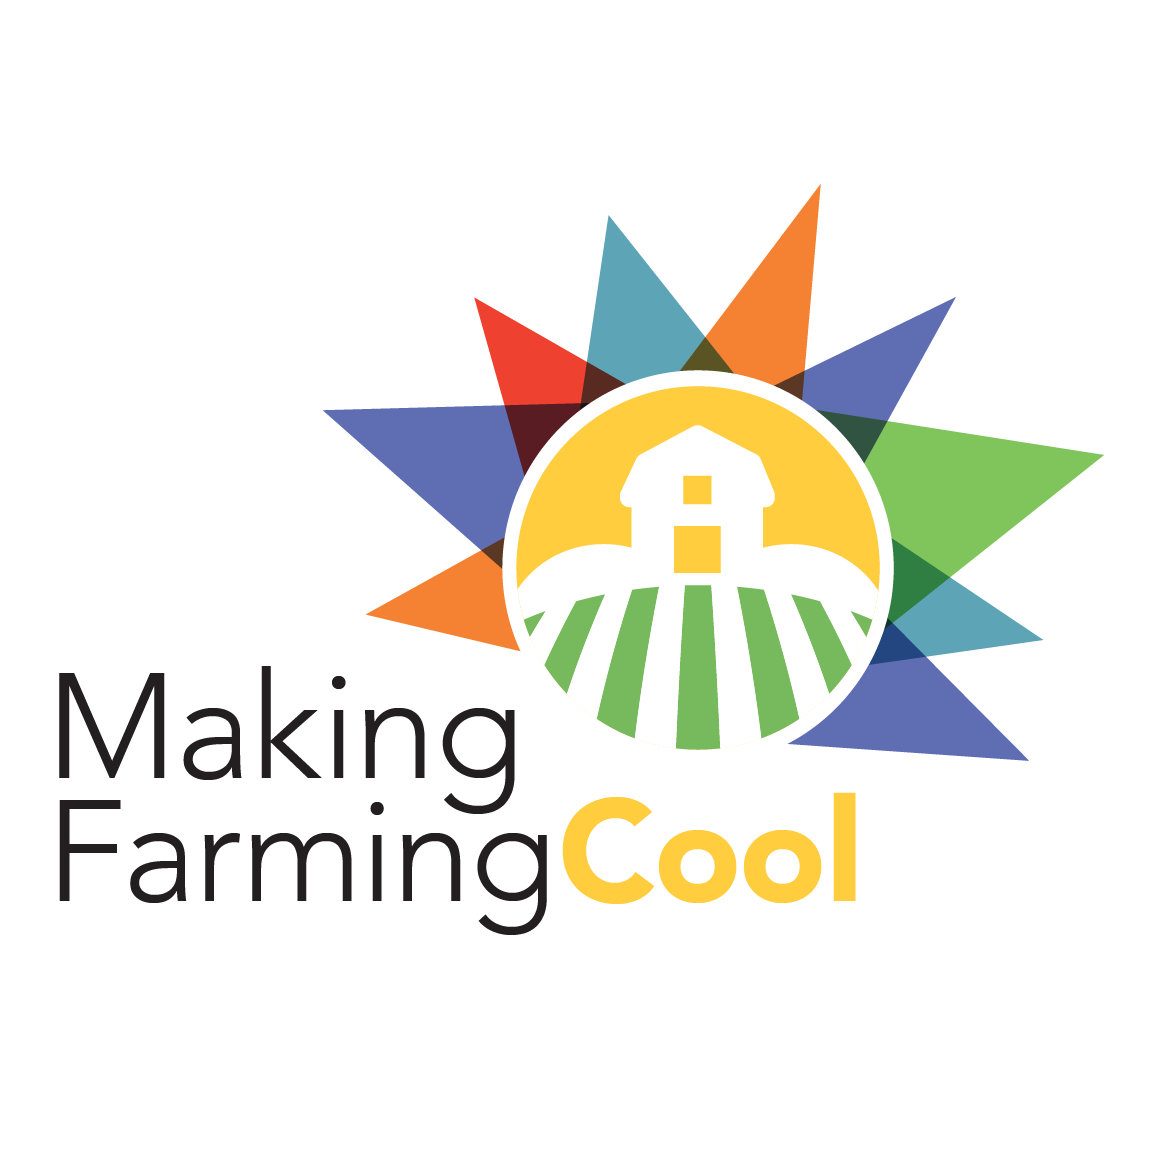 "Making Farming Cool!" Podcast Series with IGD